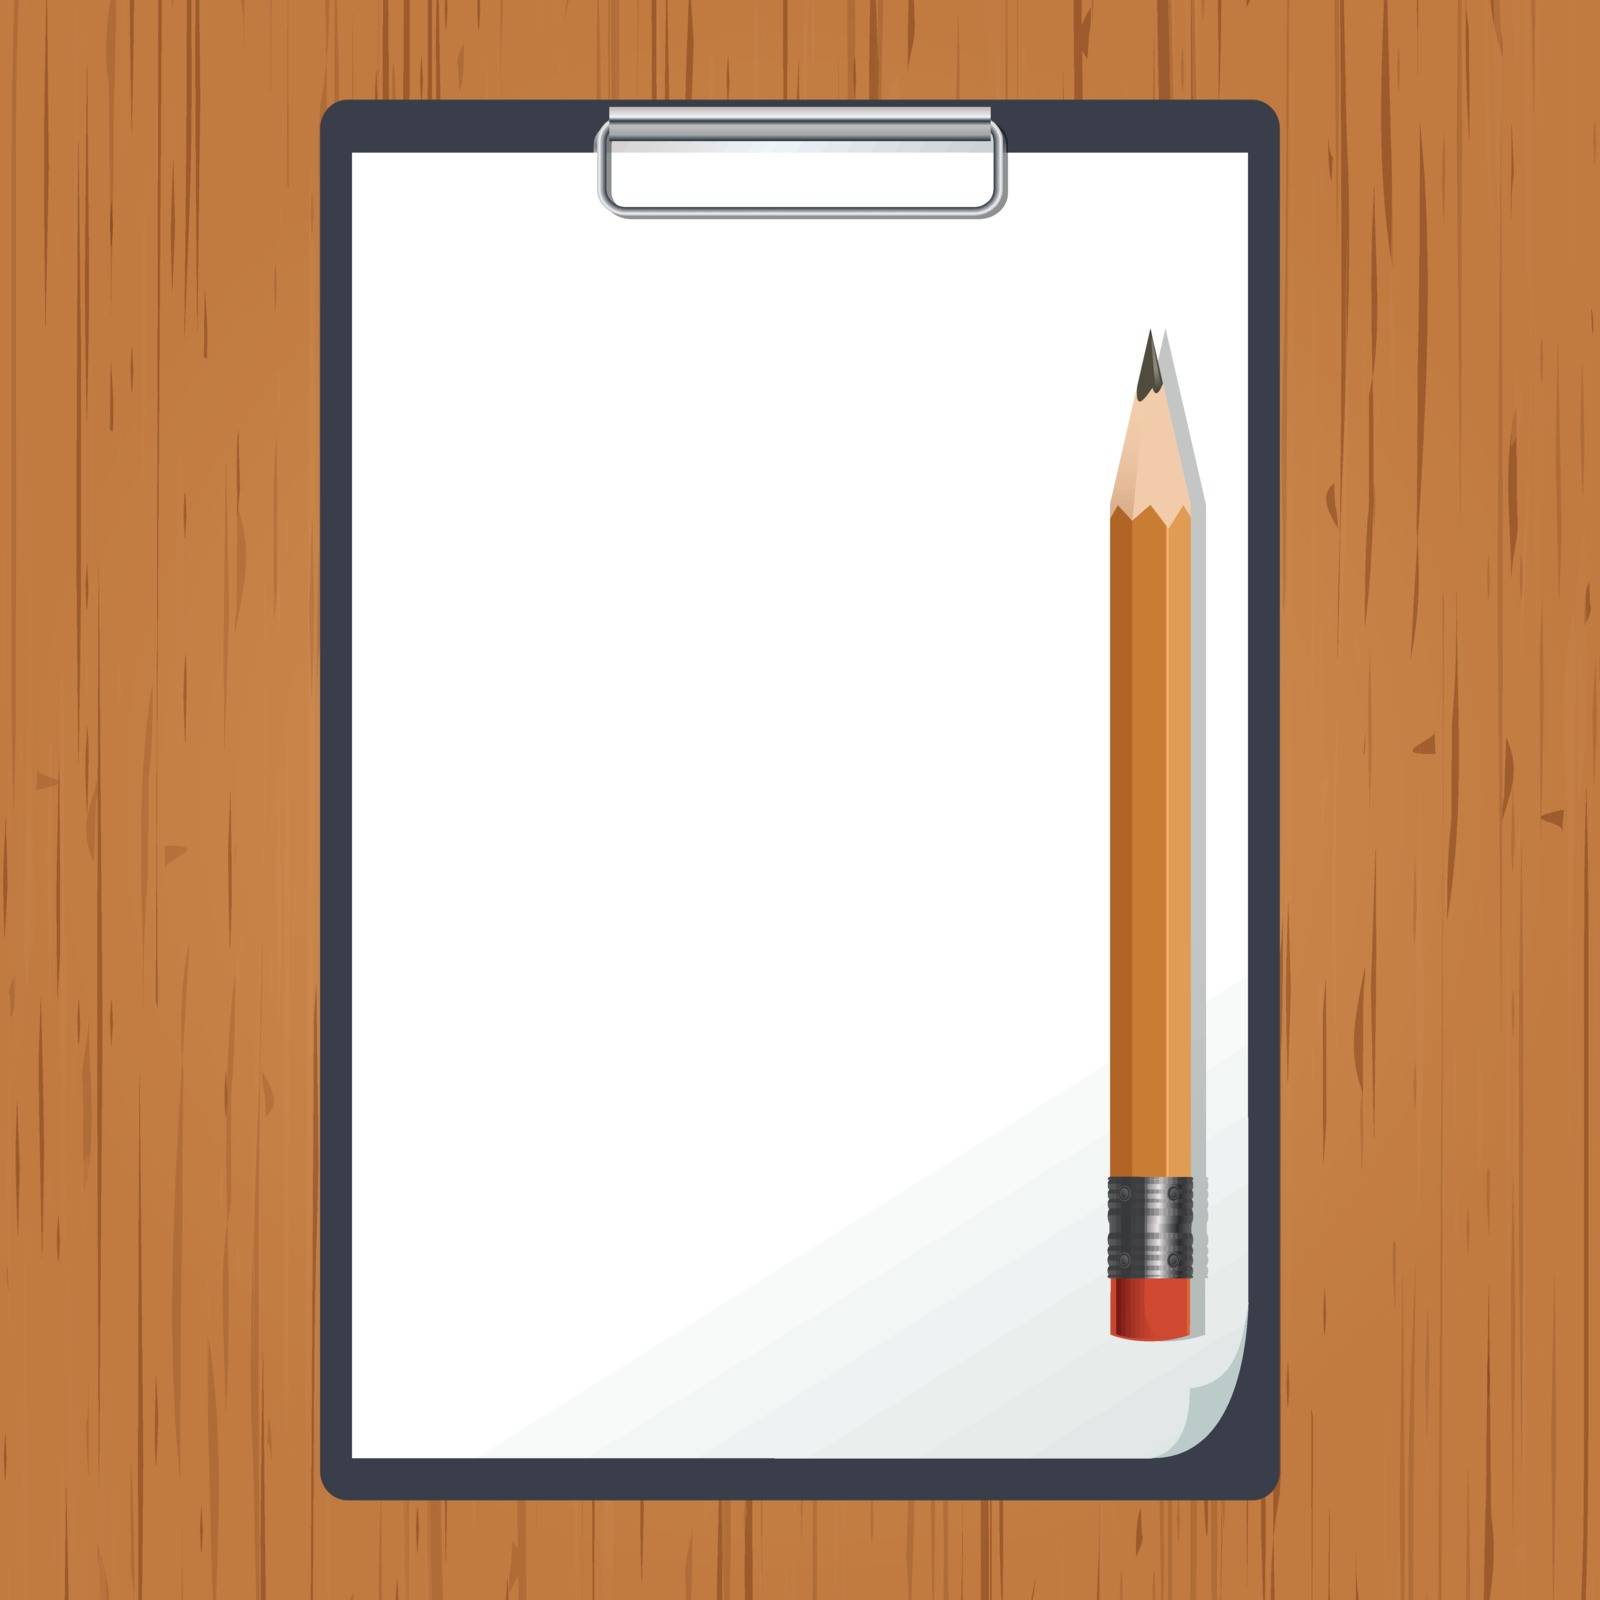 Vector image of a tablet and pencil on the table